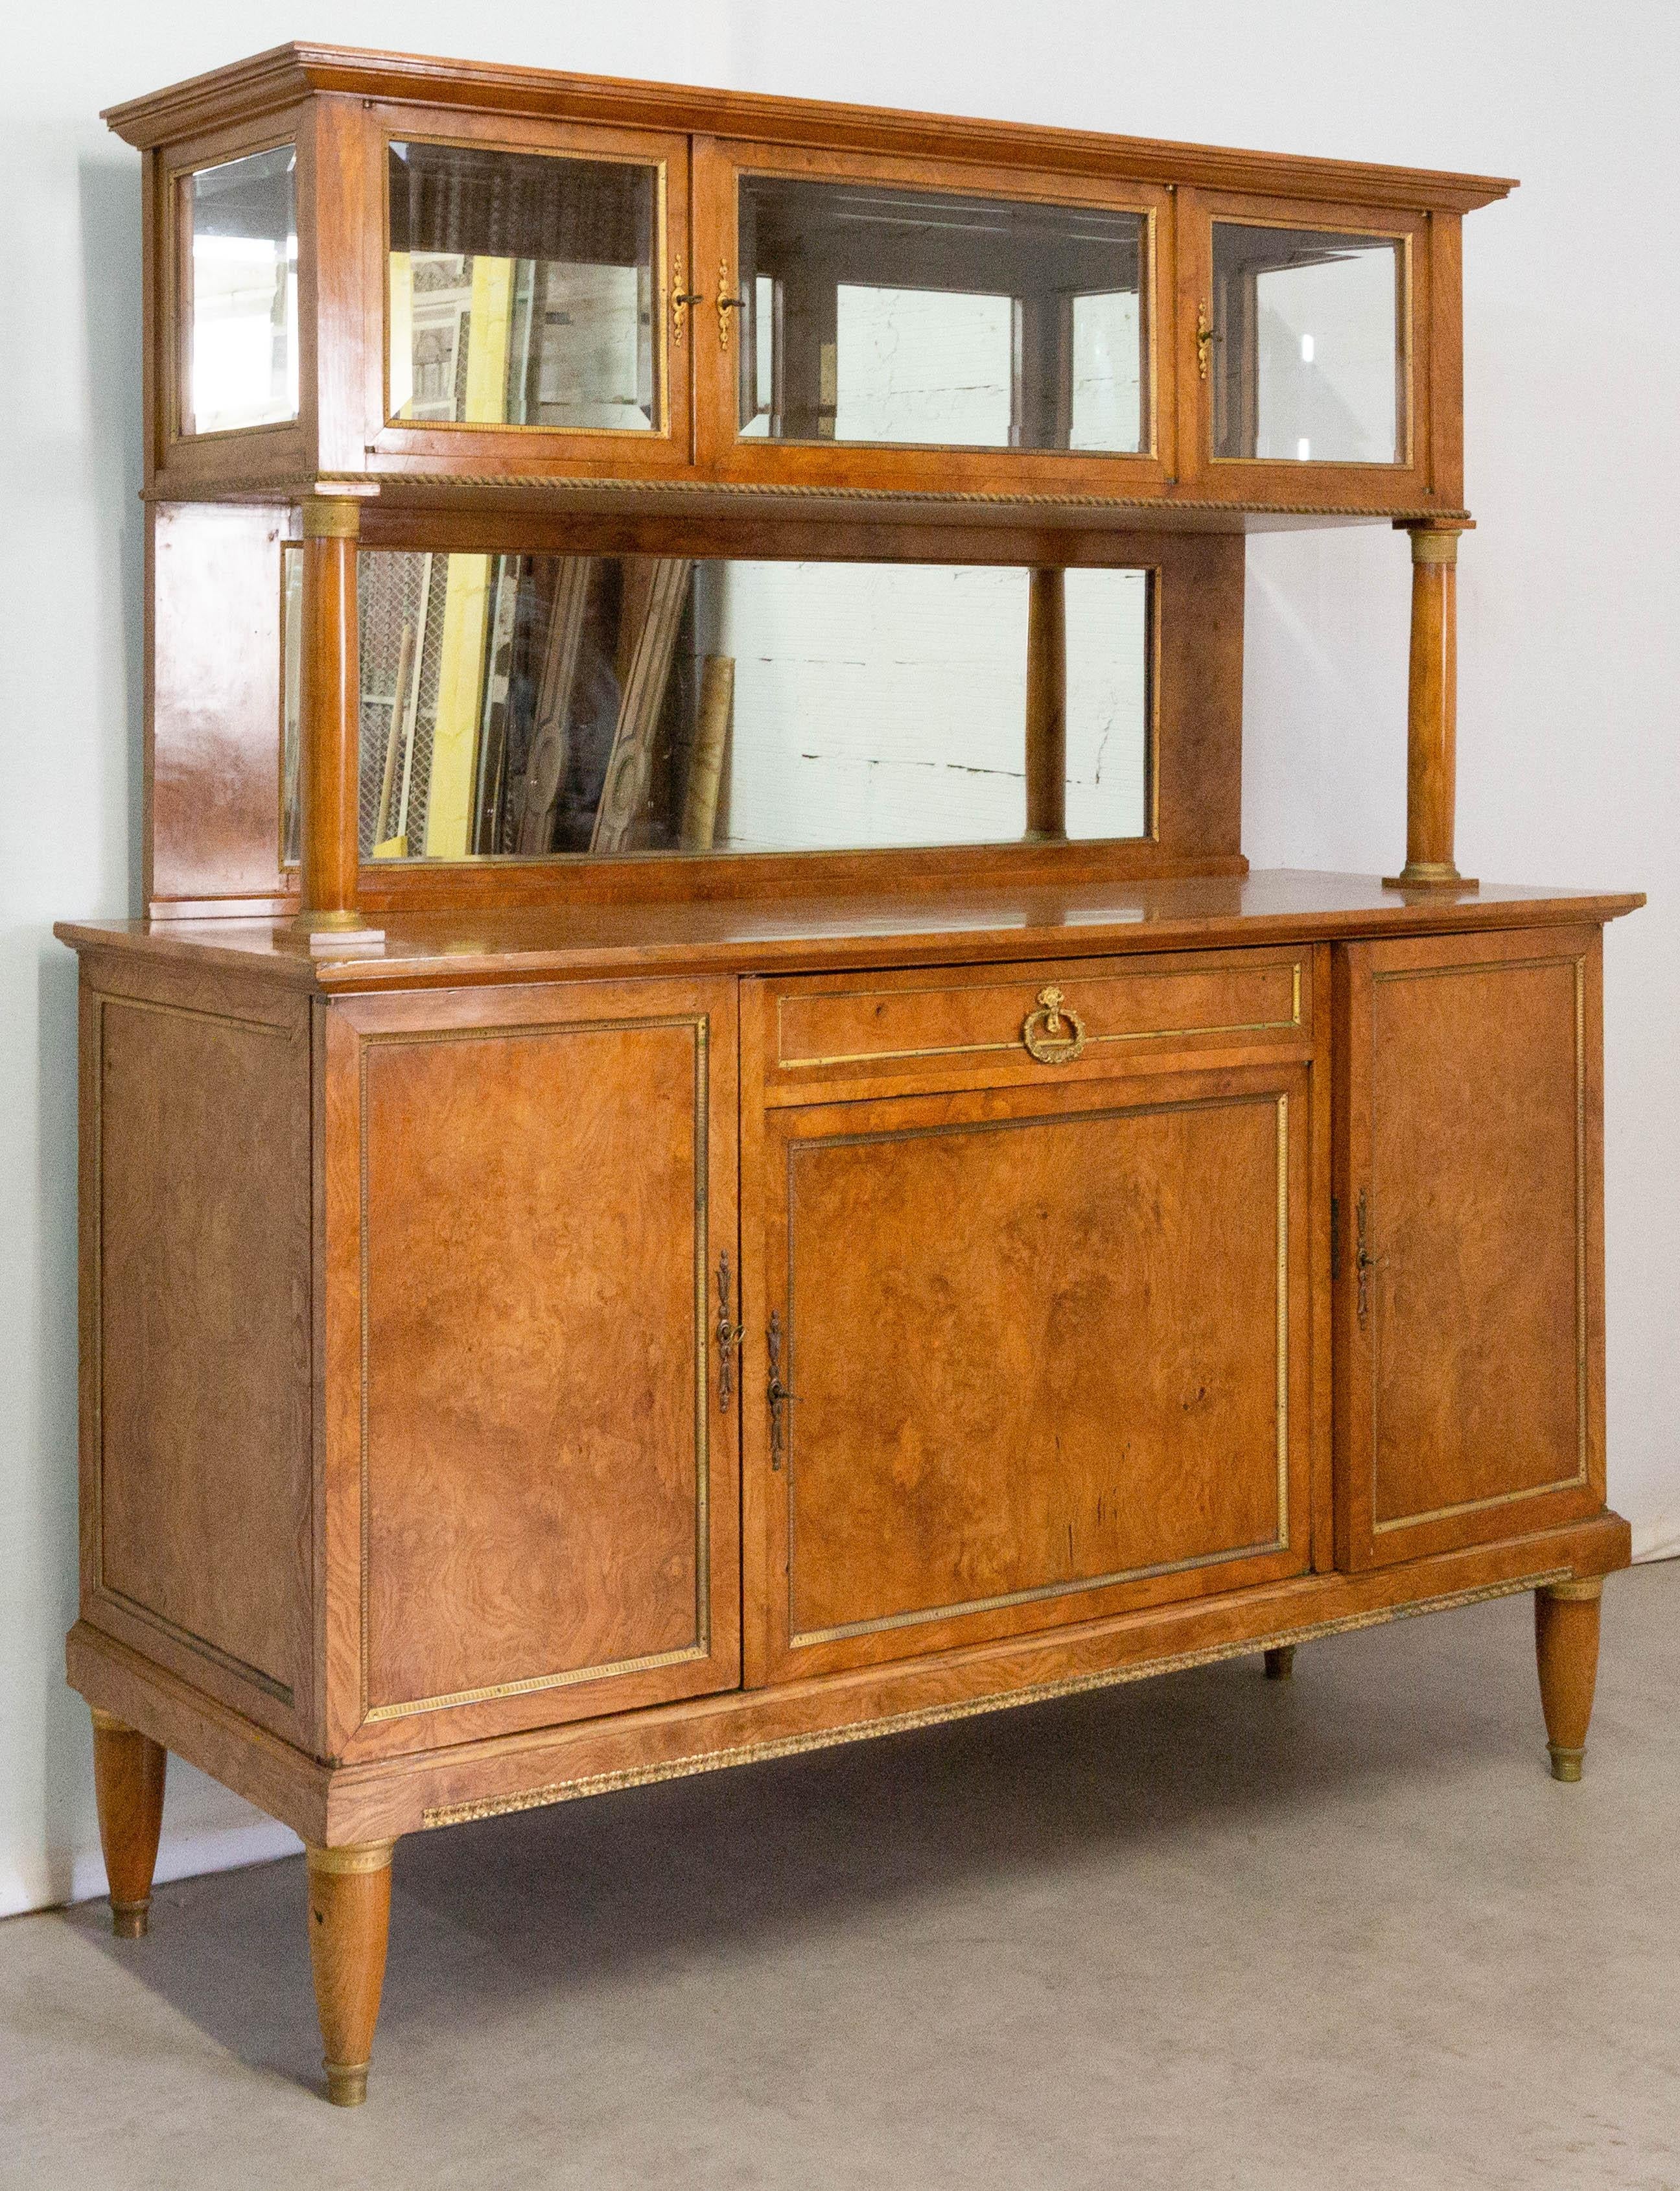 Empire style vitrine buffet antique, French, early 20th century
Burled elm wood and bronze
Beveled glass display cabinet.
Good antique condition with superb patina

Shipping:
2 packs: 
Pack 1: Top L165/ P 45.5/ H 85 cm
Pack 2: L 175/ P 45.5/ H 104